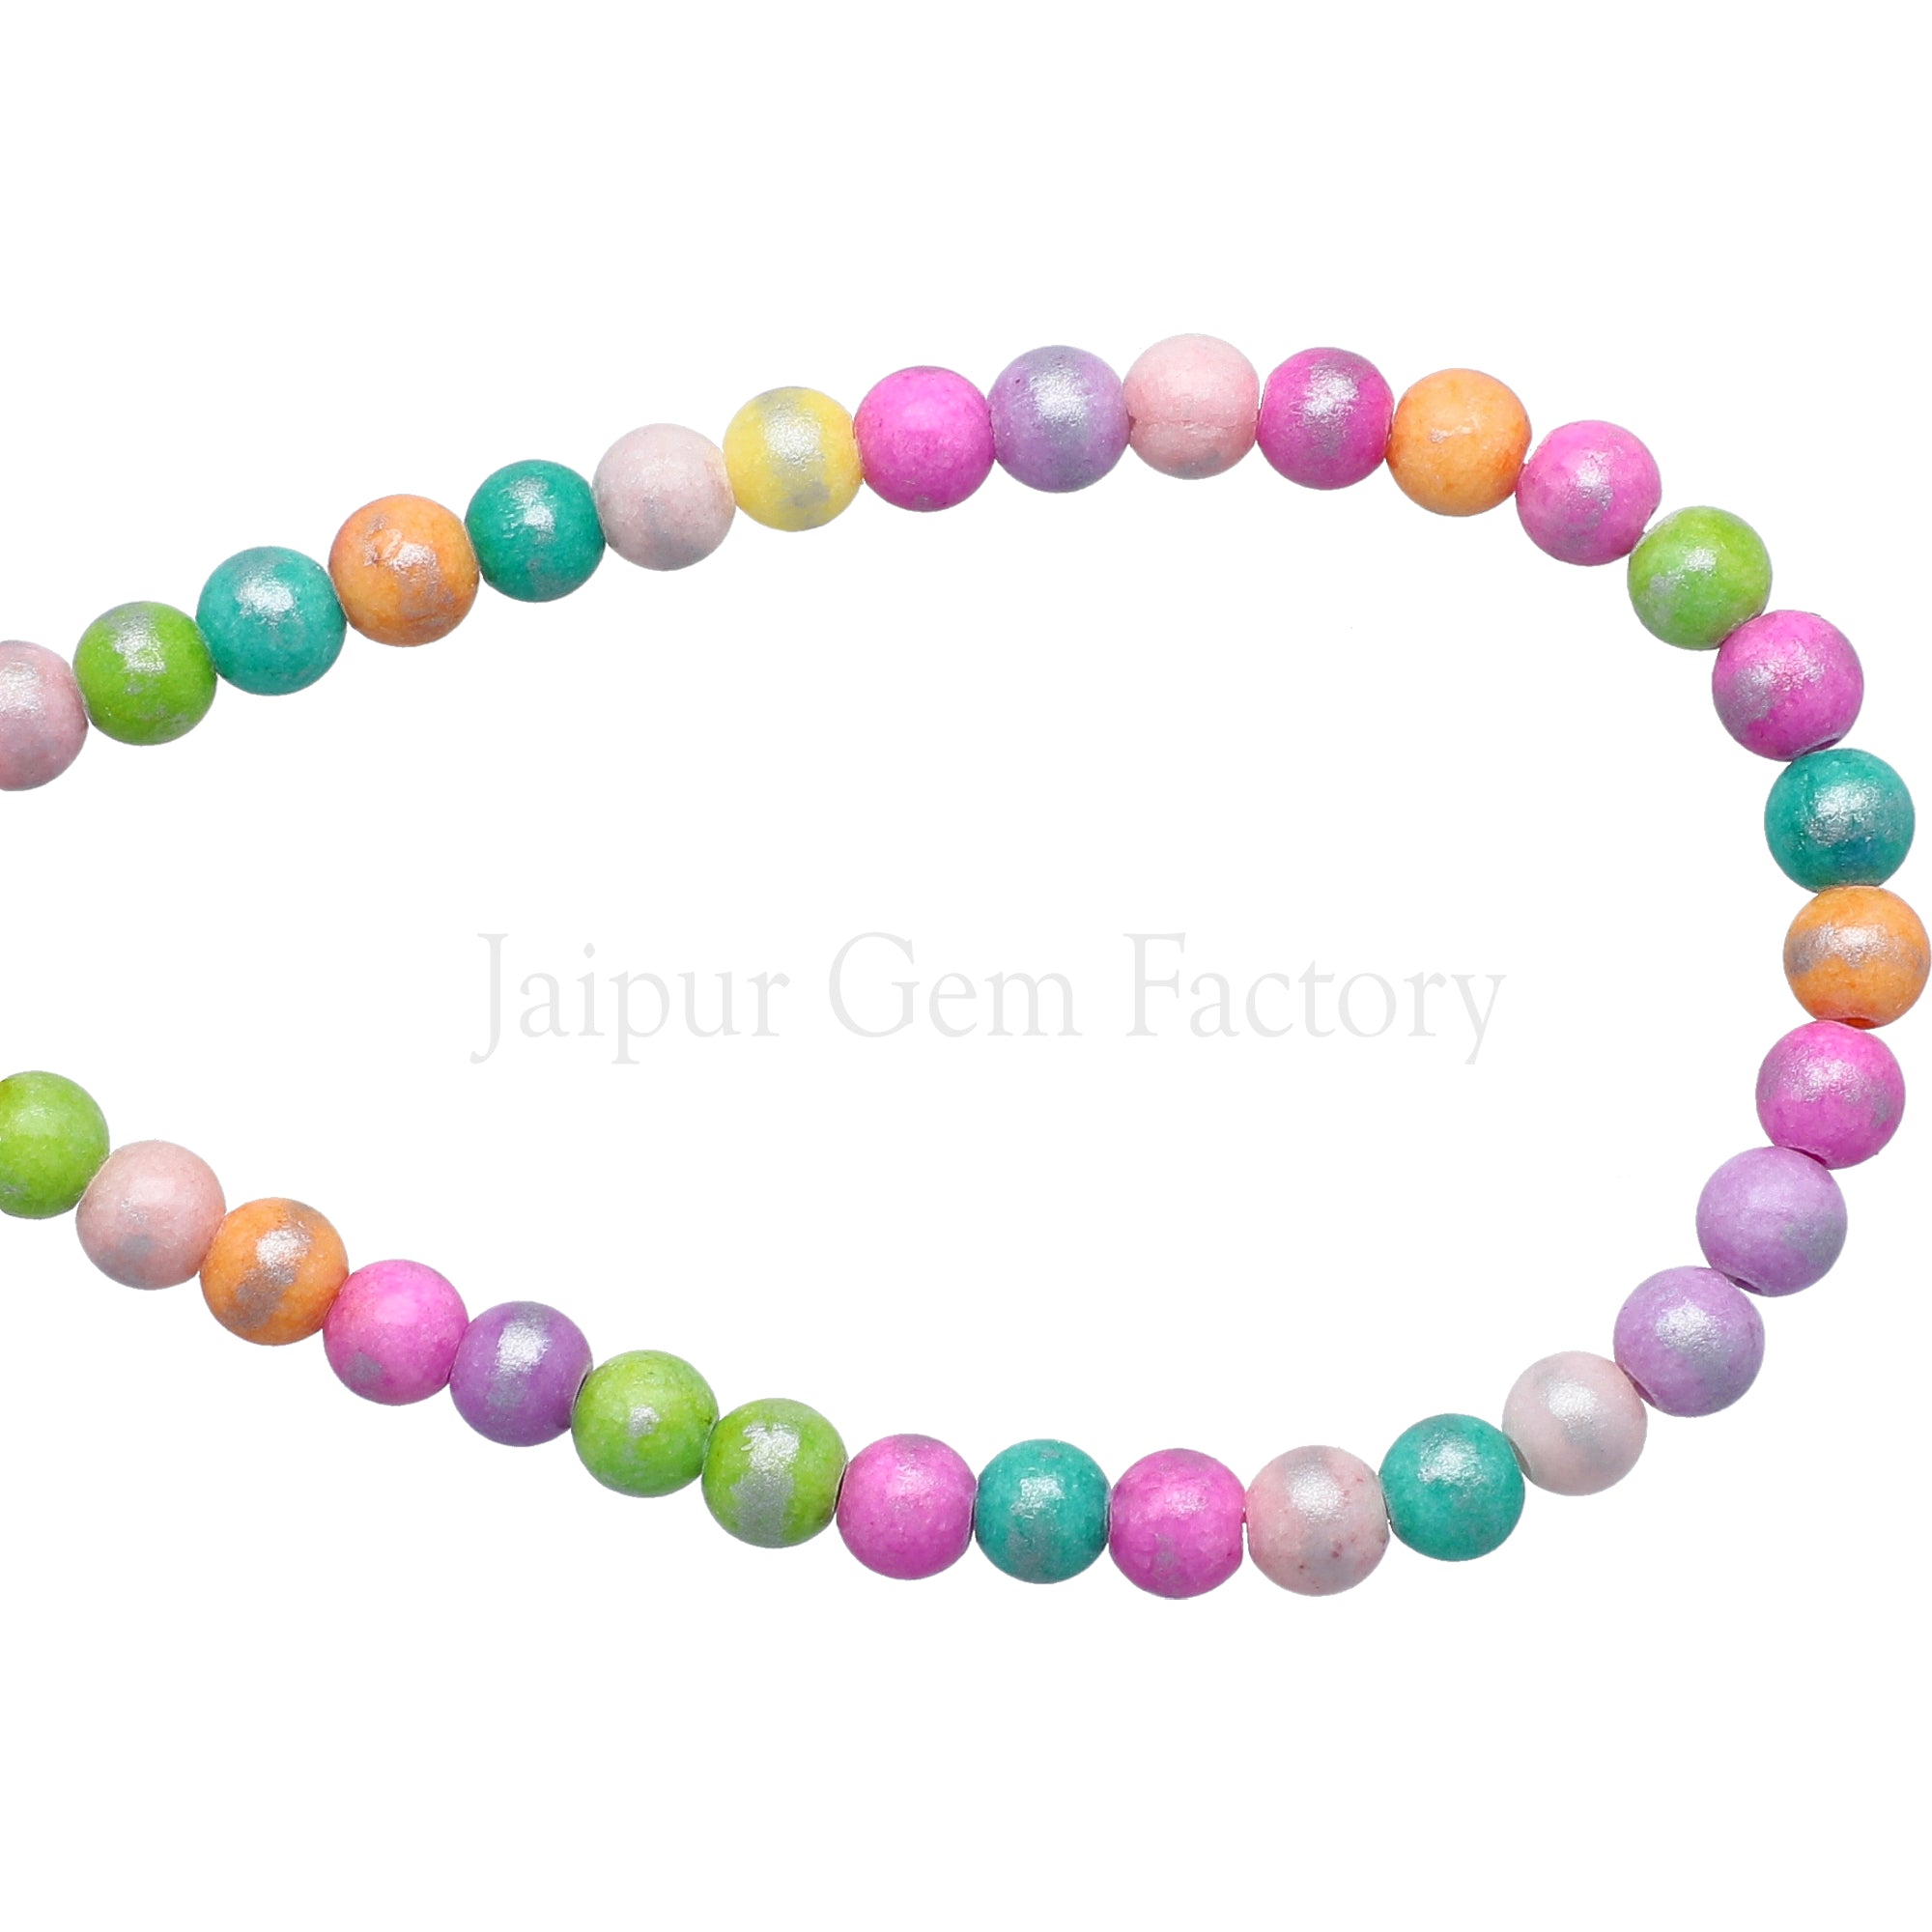 6 MM Multi Mix Color Silver Leafed Jade Smooth Round Beads 15 Inches Strand